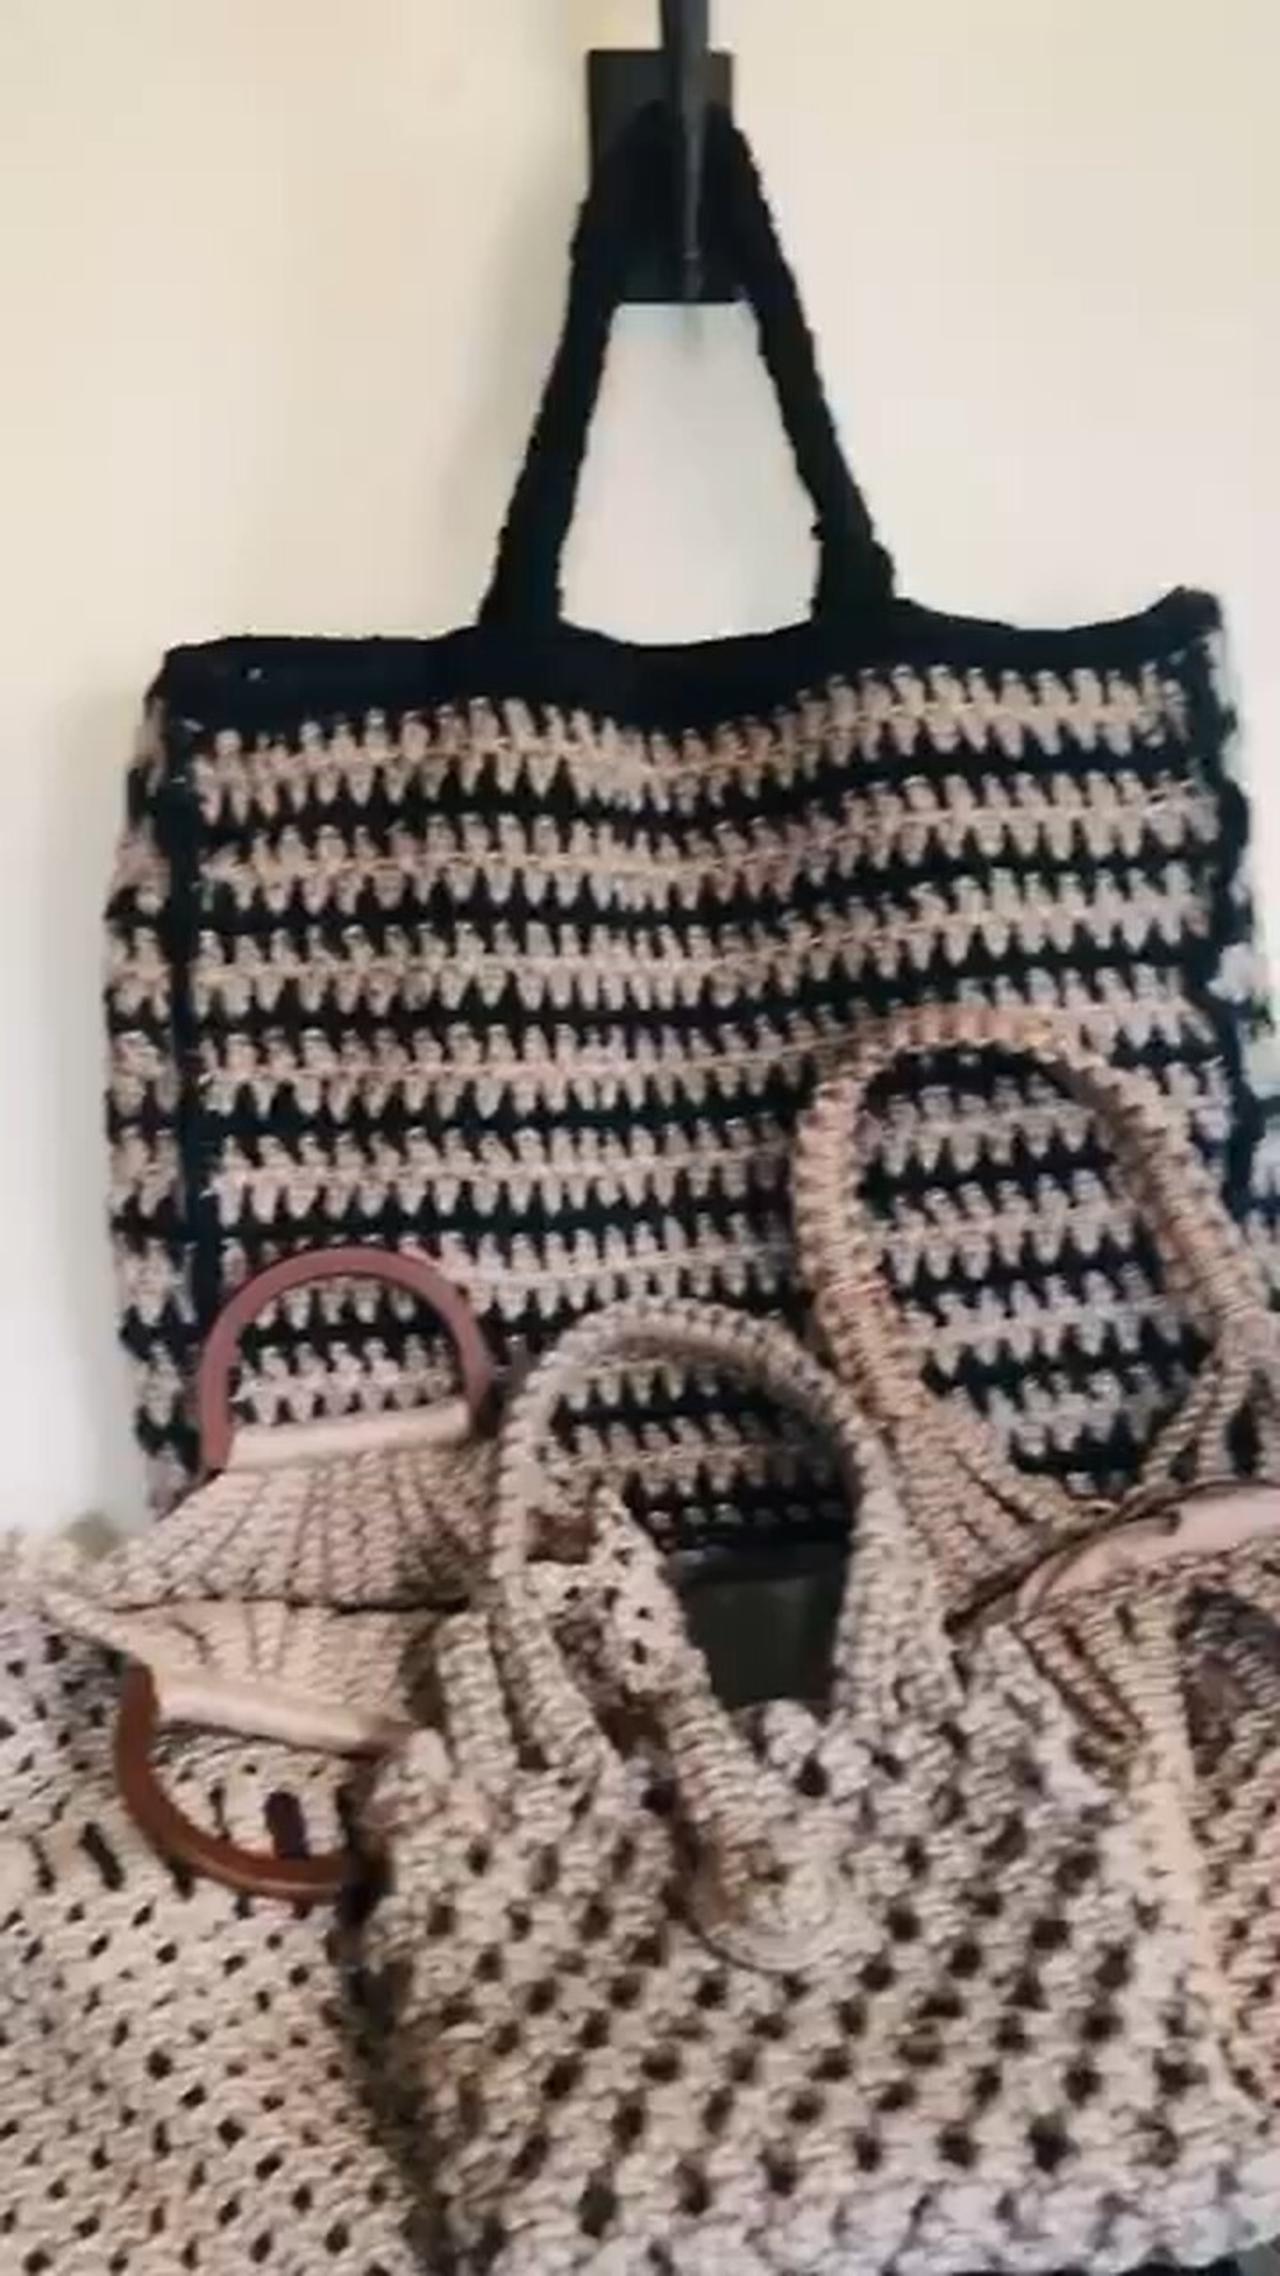 Handwoven and crochet handmade bags - One News Page VIDEO